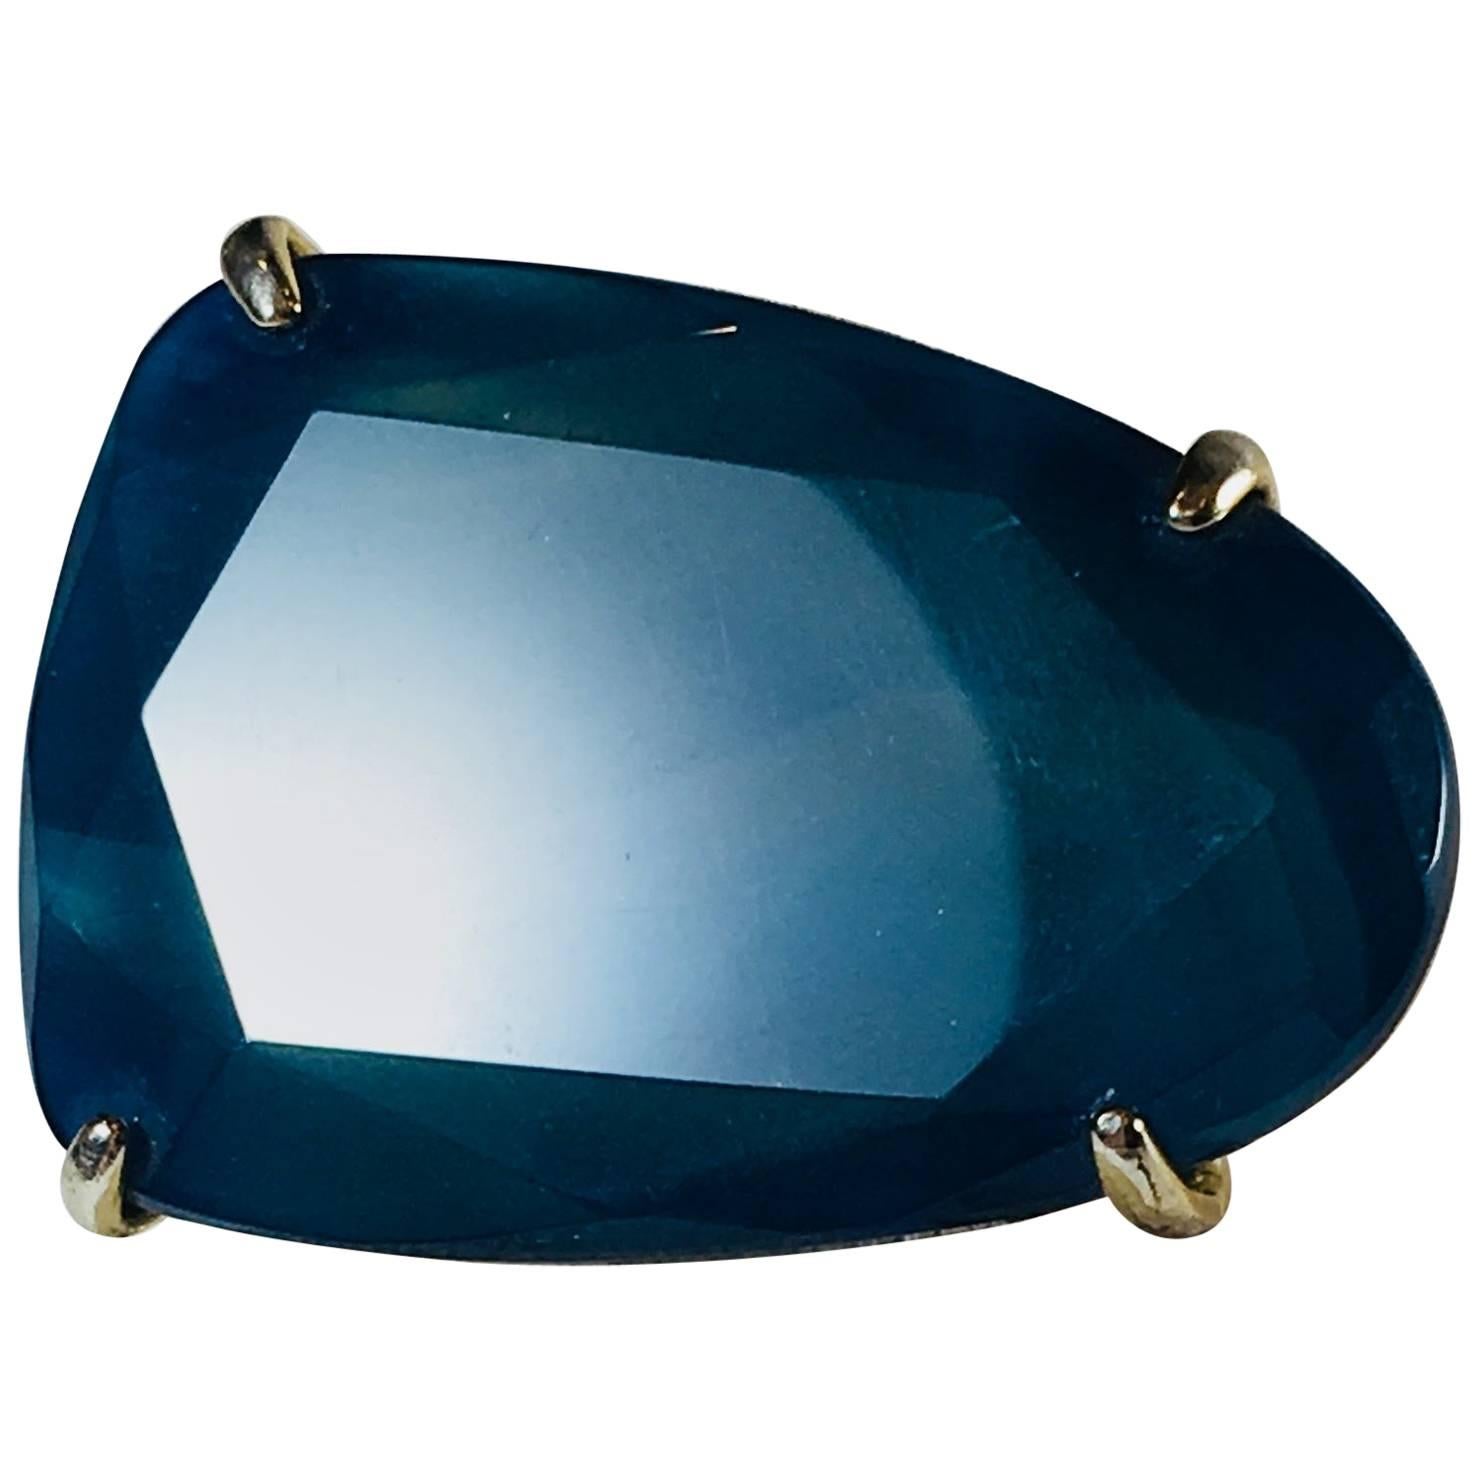 Blue Cocktail Ring